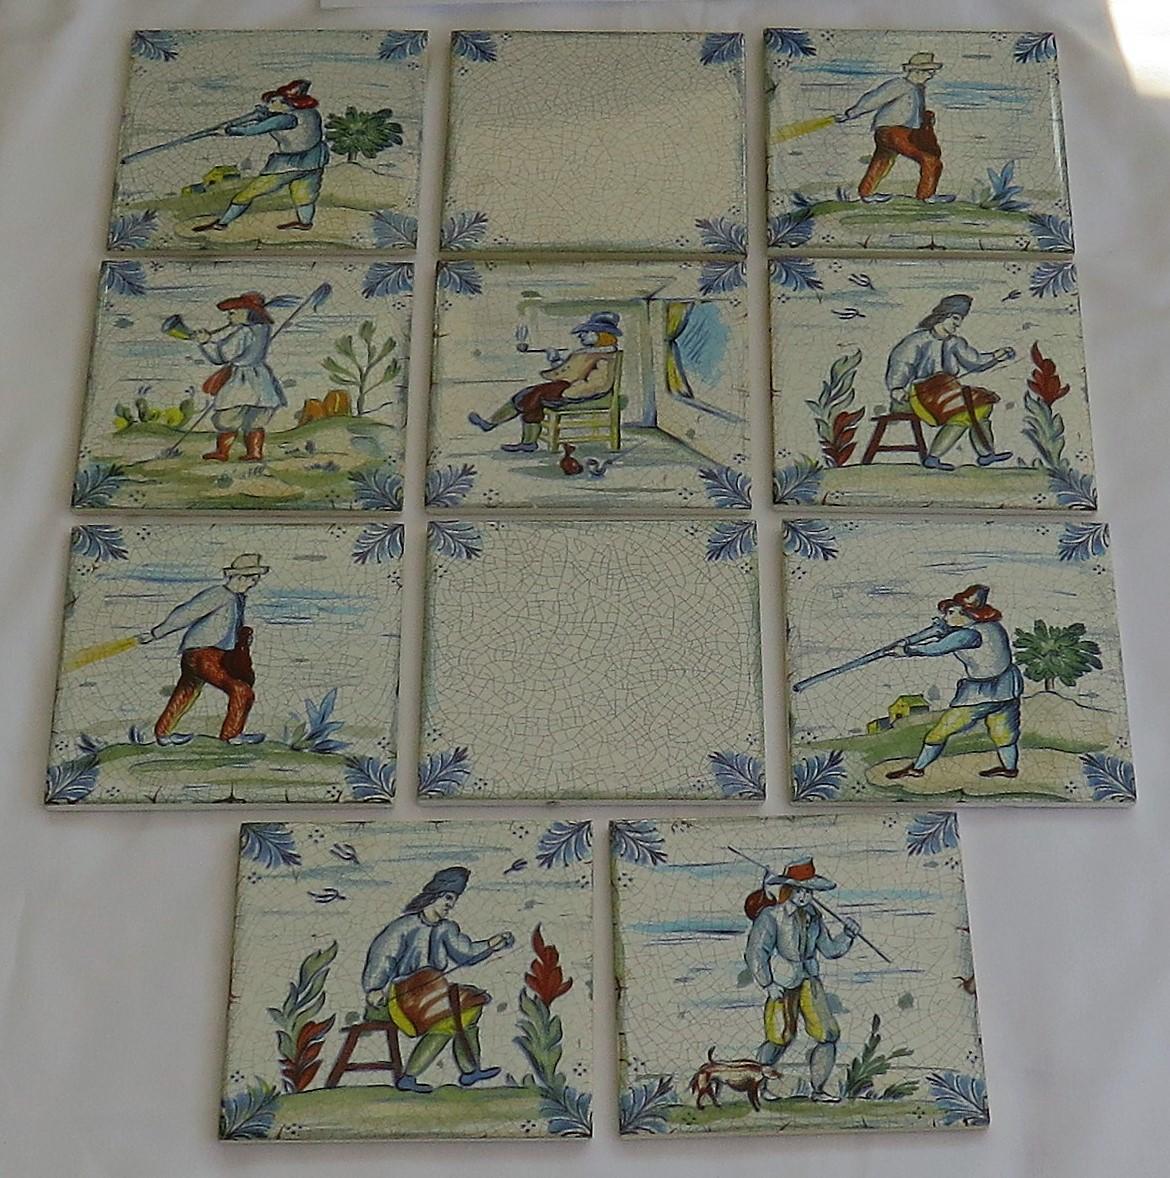 Folk Art Set of Eleven Ceramic Wall Tiles Square by Servais of Germany Set 4, circa 1950